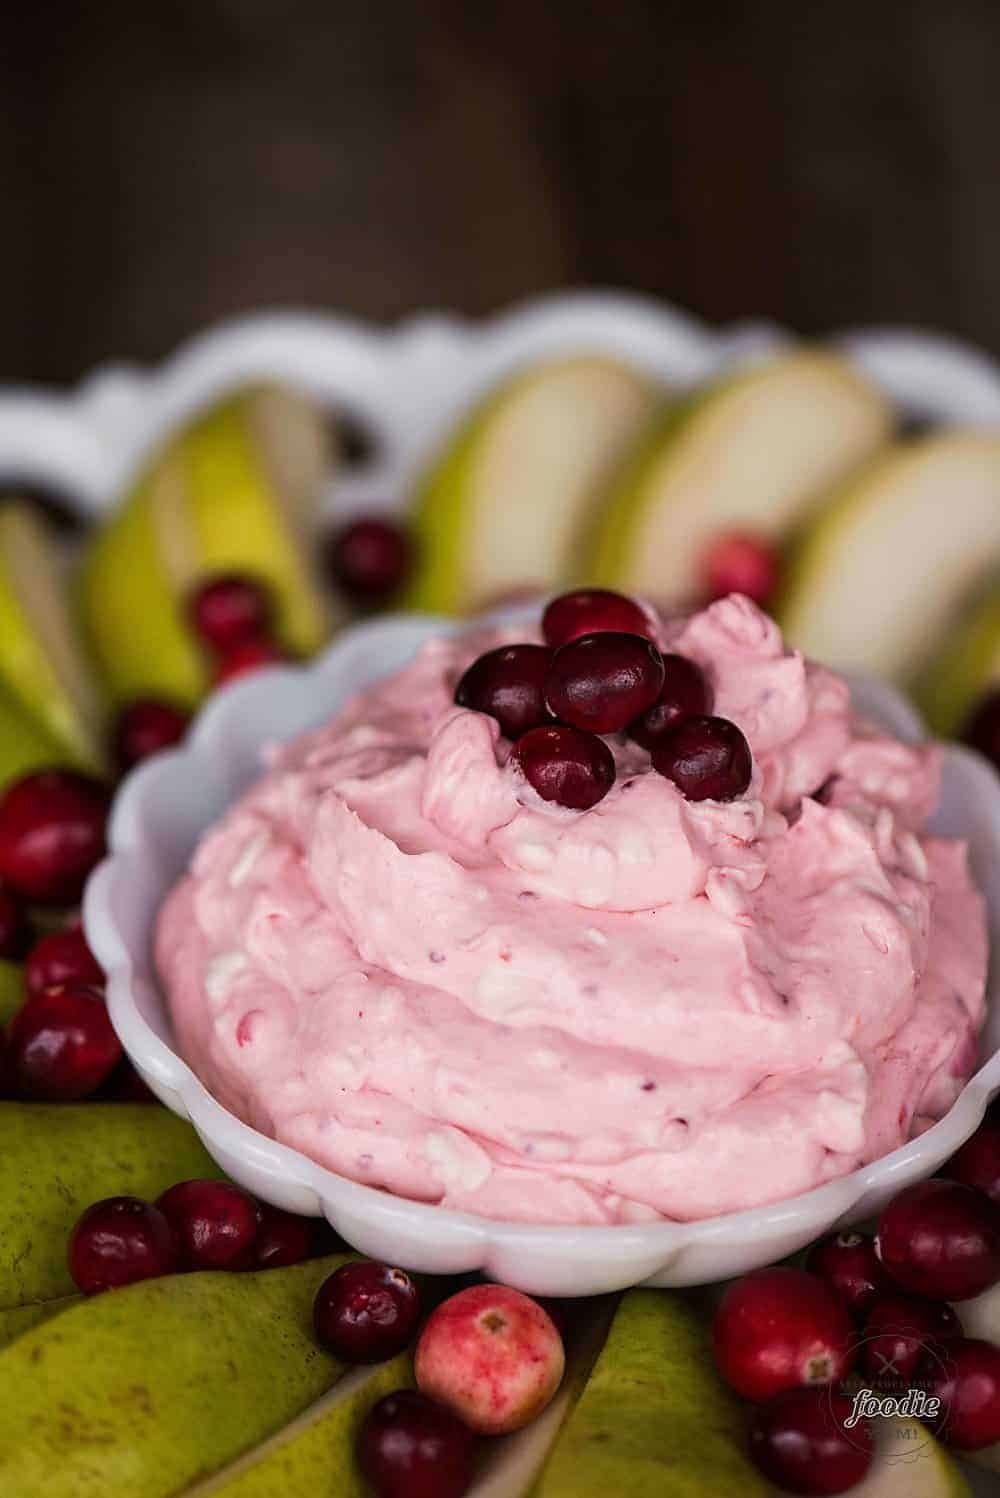 Cranberry Fruit Dip, made from leftover homemade cranberry sauce and cream cheese, is the perfect party appetizer during the winter holidays.